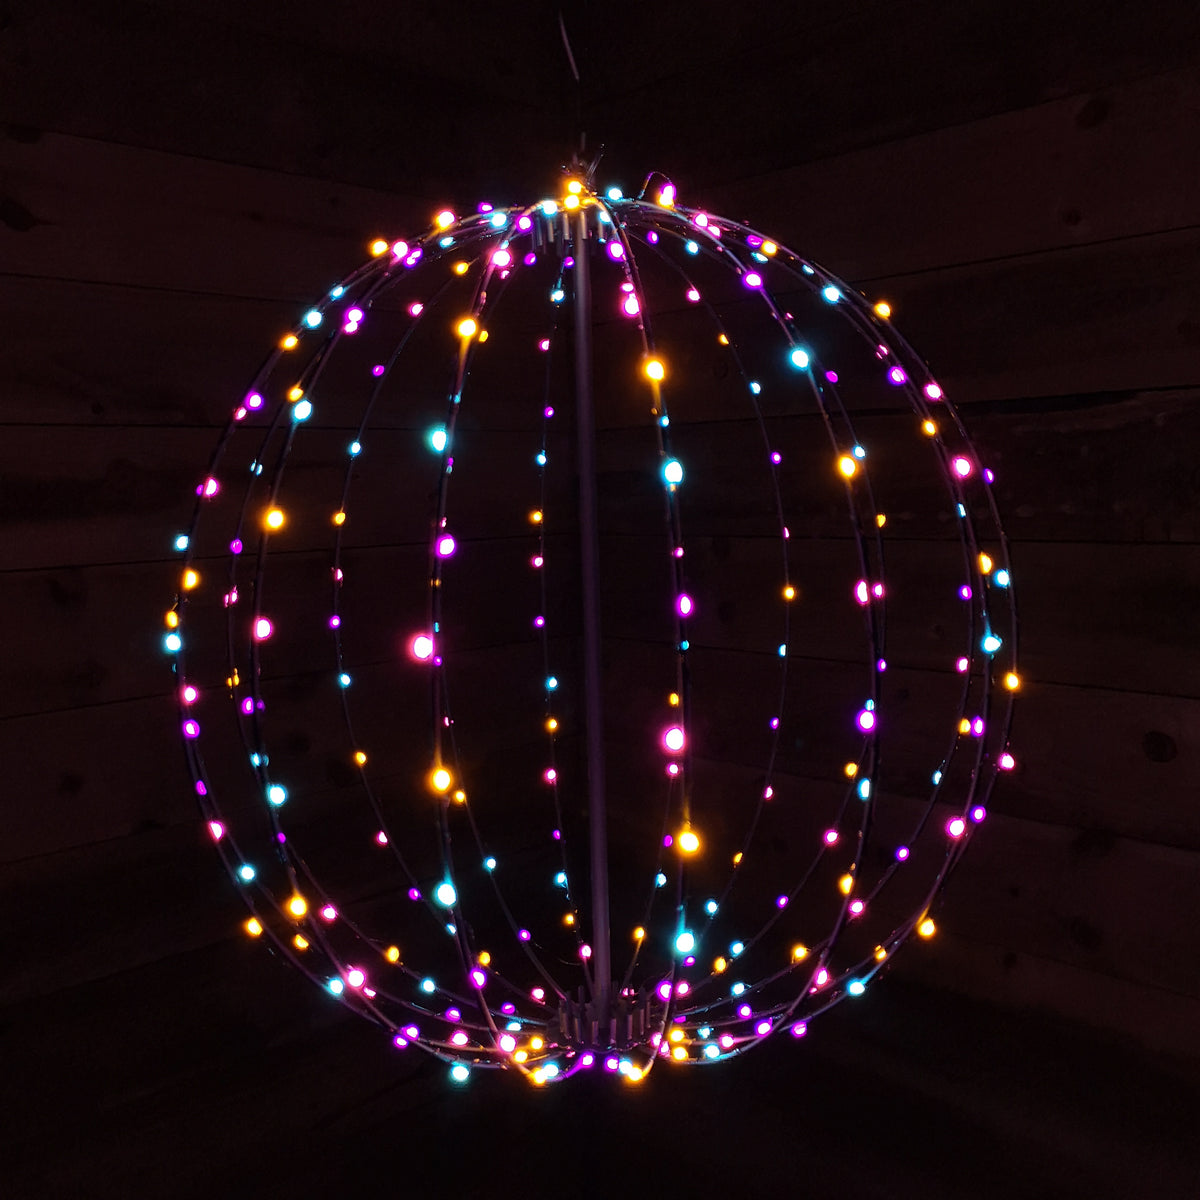 40cm Black Metal Frame Ball Christmas Decoration with 240 in Rainbow LED